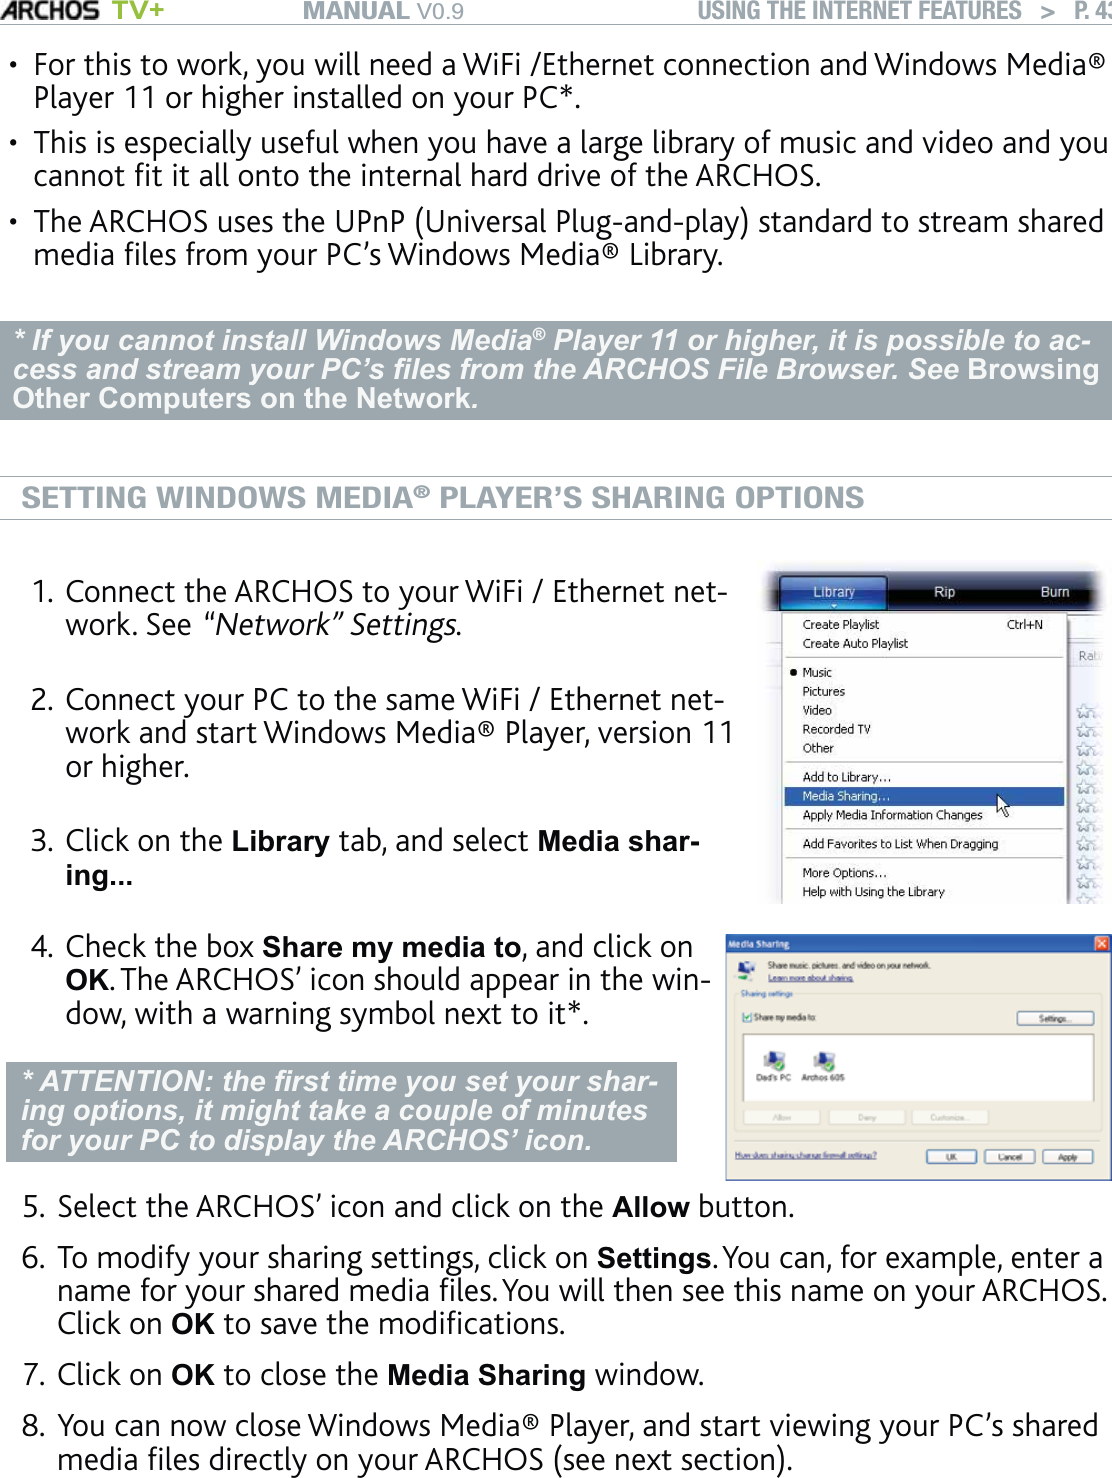 MANUAL V0.9 TV+ USING THE INTERNET FEATURES   &gt;   P. 43For this to work, you will need a WiFi /Ethernet connection and Windows Media® Player 11 or higher installed on your PC*. This is especially useful when you have a large library of music and video and you cannot ﬁt it all onto the internal hard drive of the ARCHOS.The ARCHOS uses the UPnP (Universal Plug-and-play) standard to stream shared media ﬁles from your PC’s Windows Media® Library.* If you cannot install Windows Media® Player 11 or higher, it is possible to ac-cess and stream your PC’s ﬁles from the ARCHOS File Browser. See Browsing Other Computers on the Network.SETTING WINDOWS MEDIA® PLAYER’S SHARING OPTIONSConnect the ARCHOS to your WiFi / Ethernet net-work. See “Network” Settings.Connect your PC to the same WiFi / Ethernet net-work and start Windows Media® Player, version 11 or higher. Click on the Library tab, and select Media shar-ing... 1.2.3.Check the box Share my media to, and click on OK. The ARCHOS’ icon should appear in the win-dow, with a warning symbol next to it*. * ATTENTION: the ﬁrst time you set your shar-ing options, it might take a couple of minutes for your PC to display the ARCHOS’ icon.4.Select the ARCHOS’ icon and click on the Allow button.To modify your sharing settings, click on Settings. You can, for example, enter a name for your shared media ﬁles. You will then see this name on your ARCHOS. Click on OK to save the modiﬁcations.Click on OK to close the Media Sharing window. You can now close Windows Media® Player, and start viewing your PC’s shared media ﬁles directly on your ARCHOS (see next section).•••5.6.7.8.